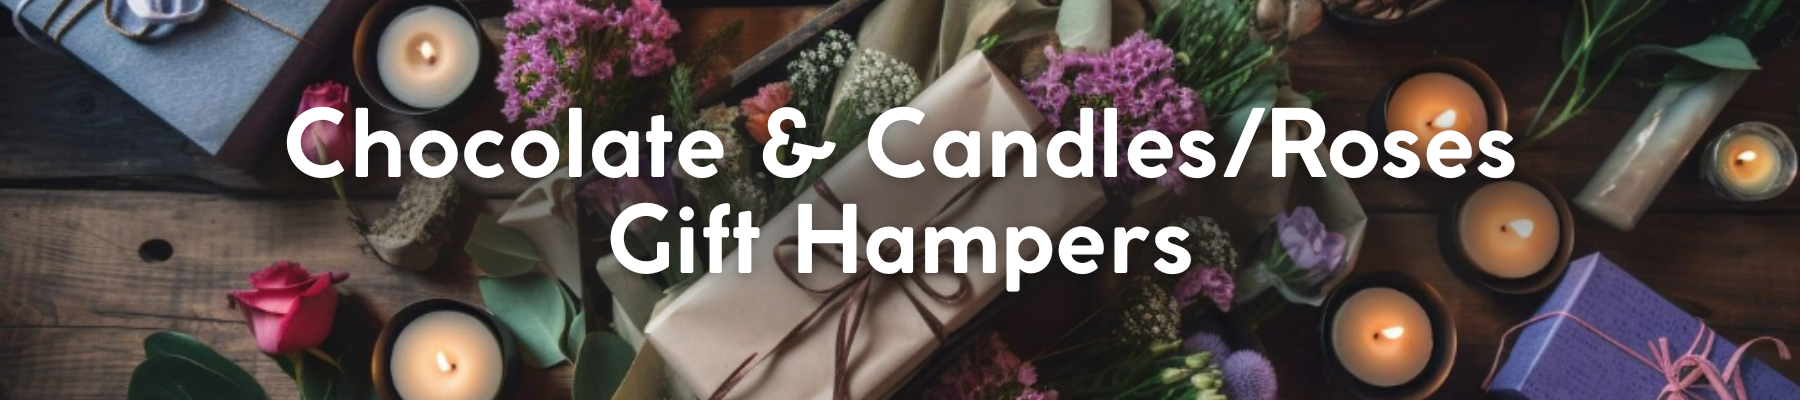 Chocolate & Candles/Roses Gift Hampers